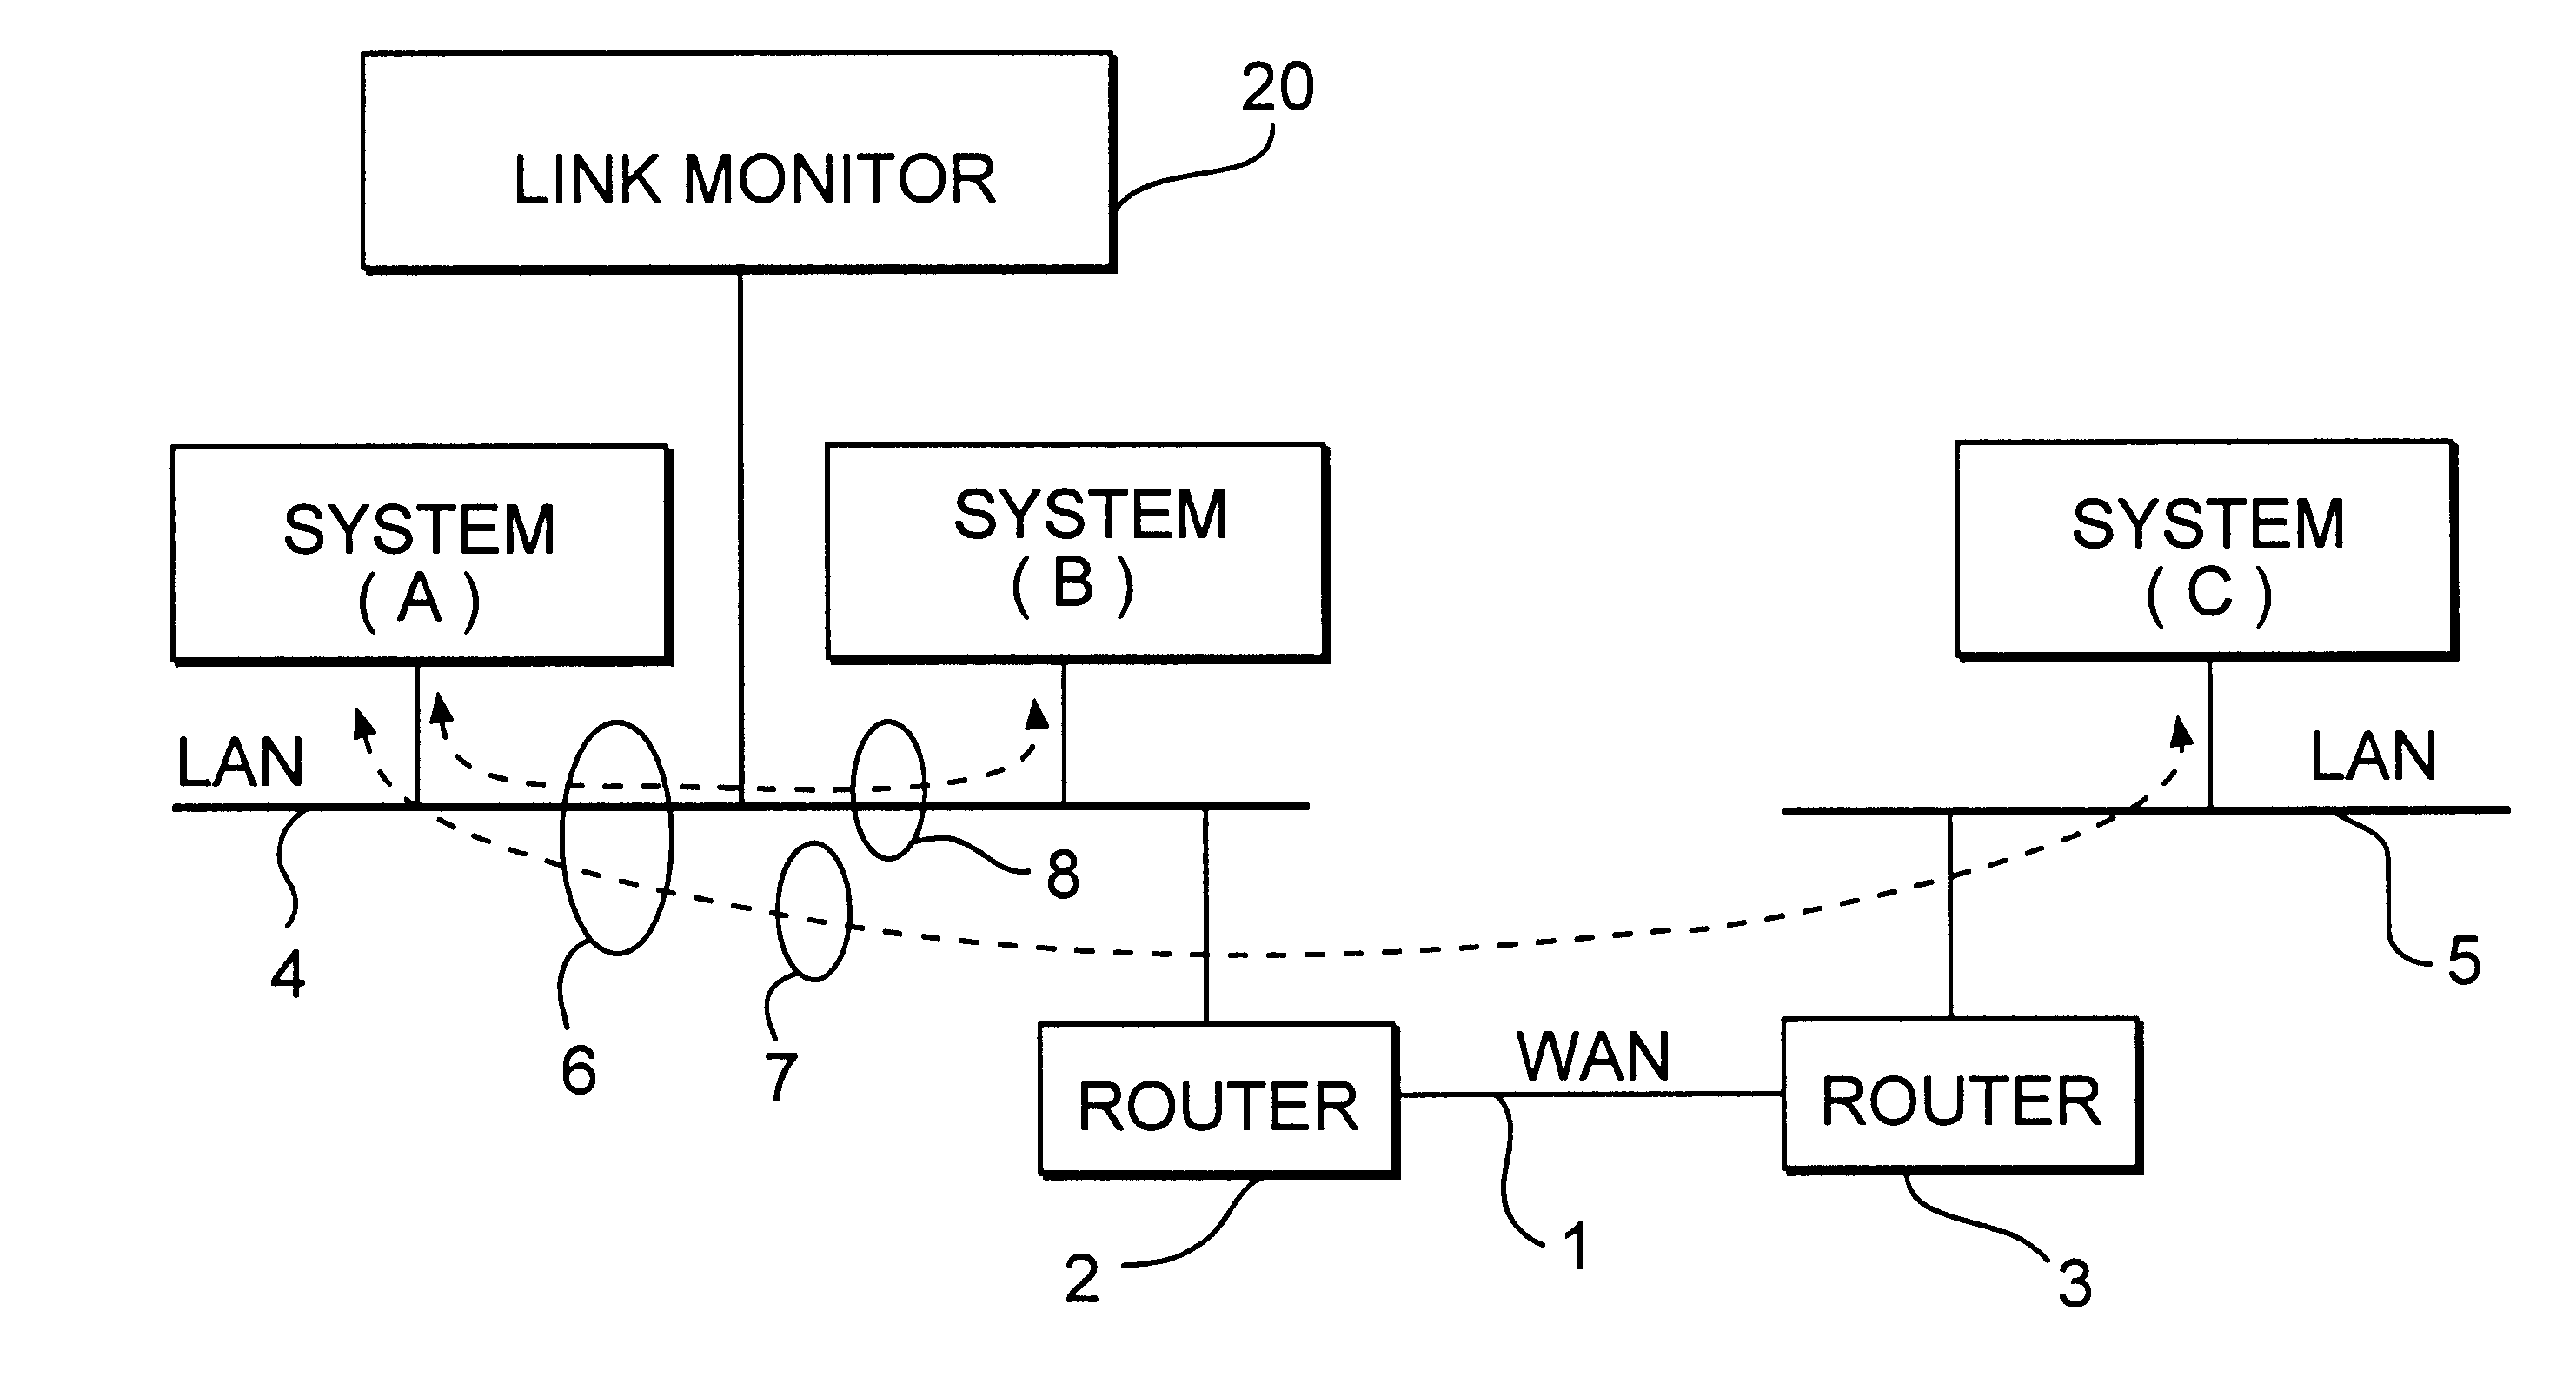 Method and apparatus for monitoring a communication link based on TCP/IP protocol by emulating behavior of the TCP protocol